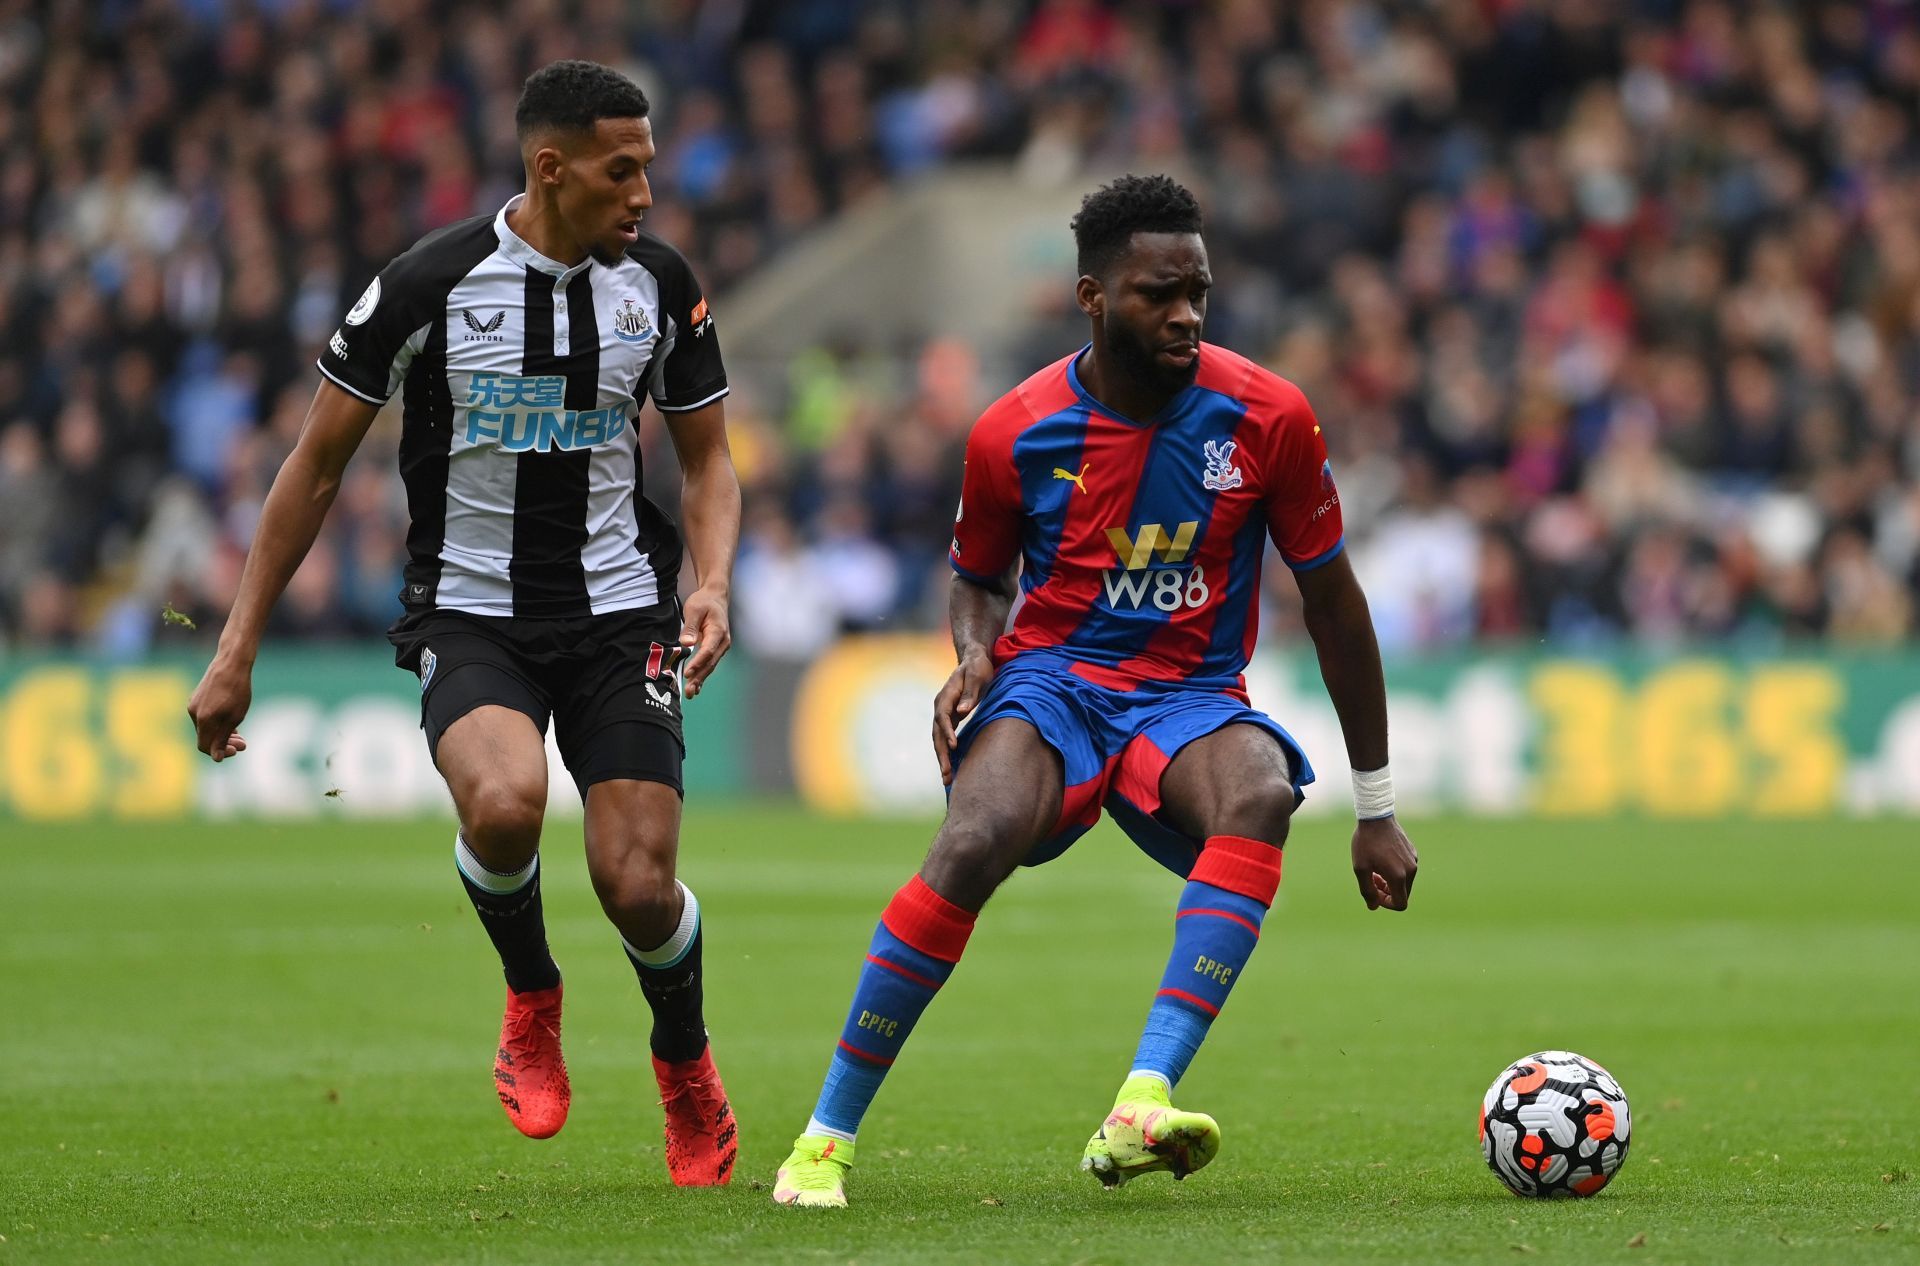 Newcastle United and Crystal Palace square off in their upcoming Premier League fixture on Wednesday